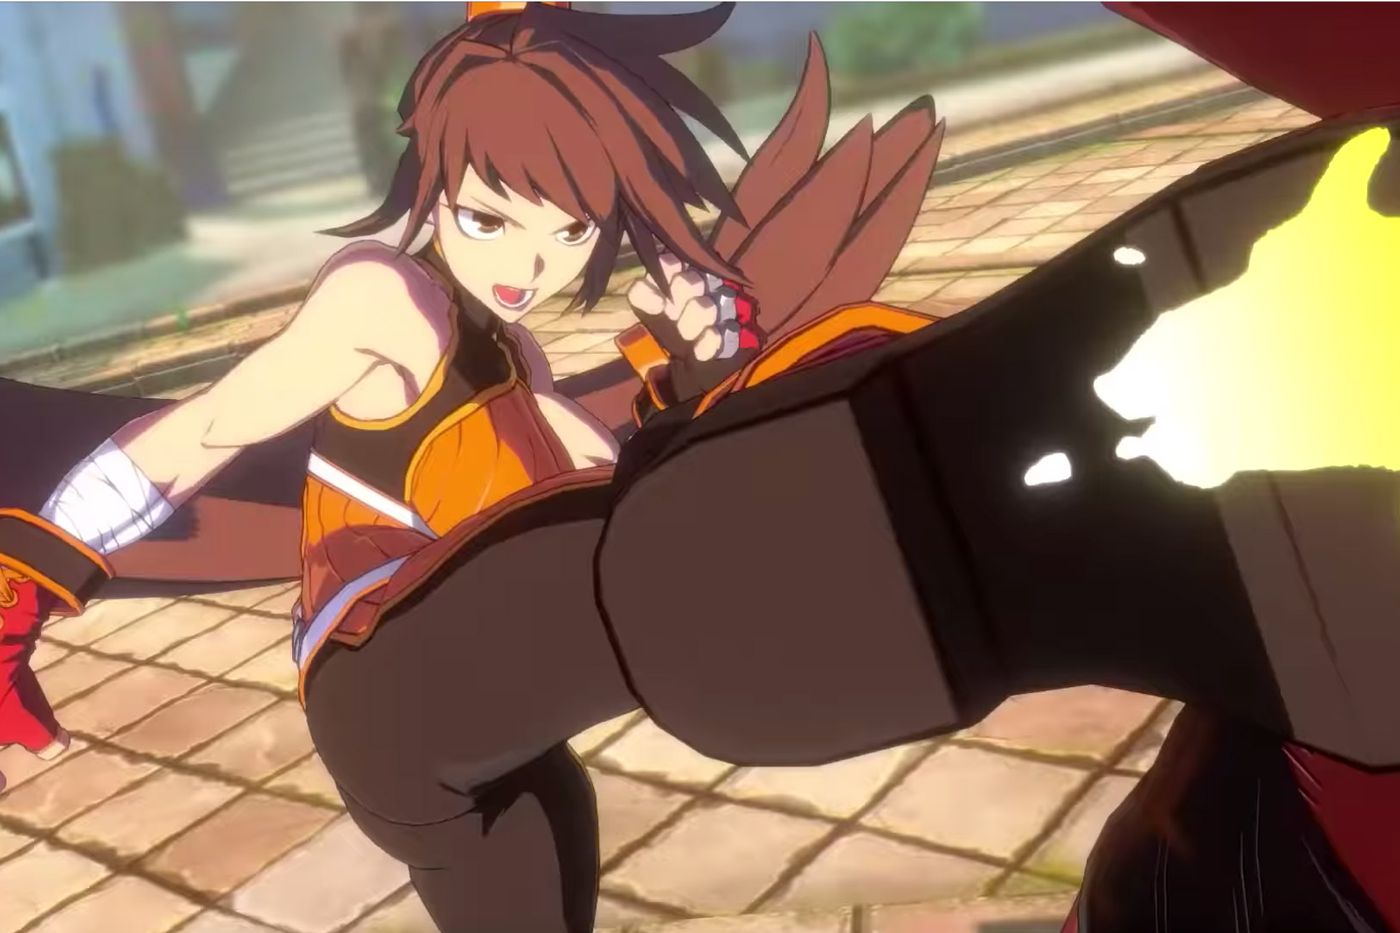 🤤 NEWEST Anime Fighters 2 Gameplay LEAK. 🤤 